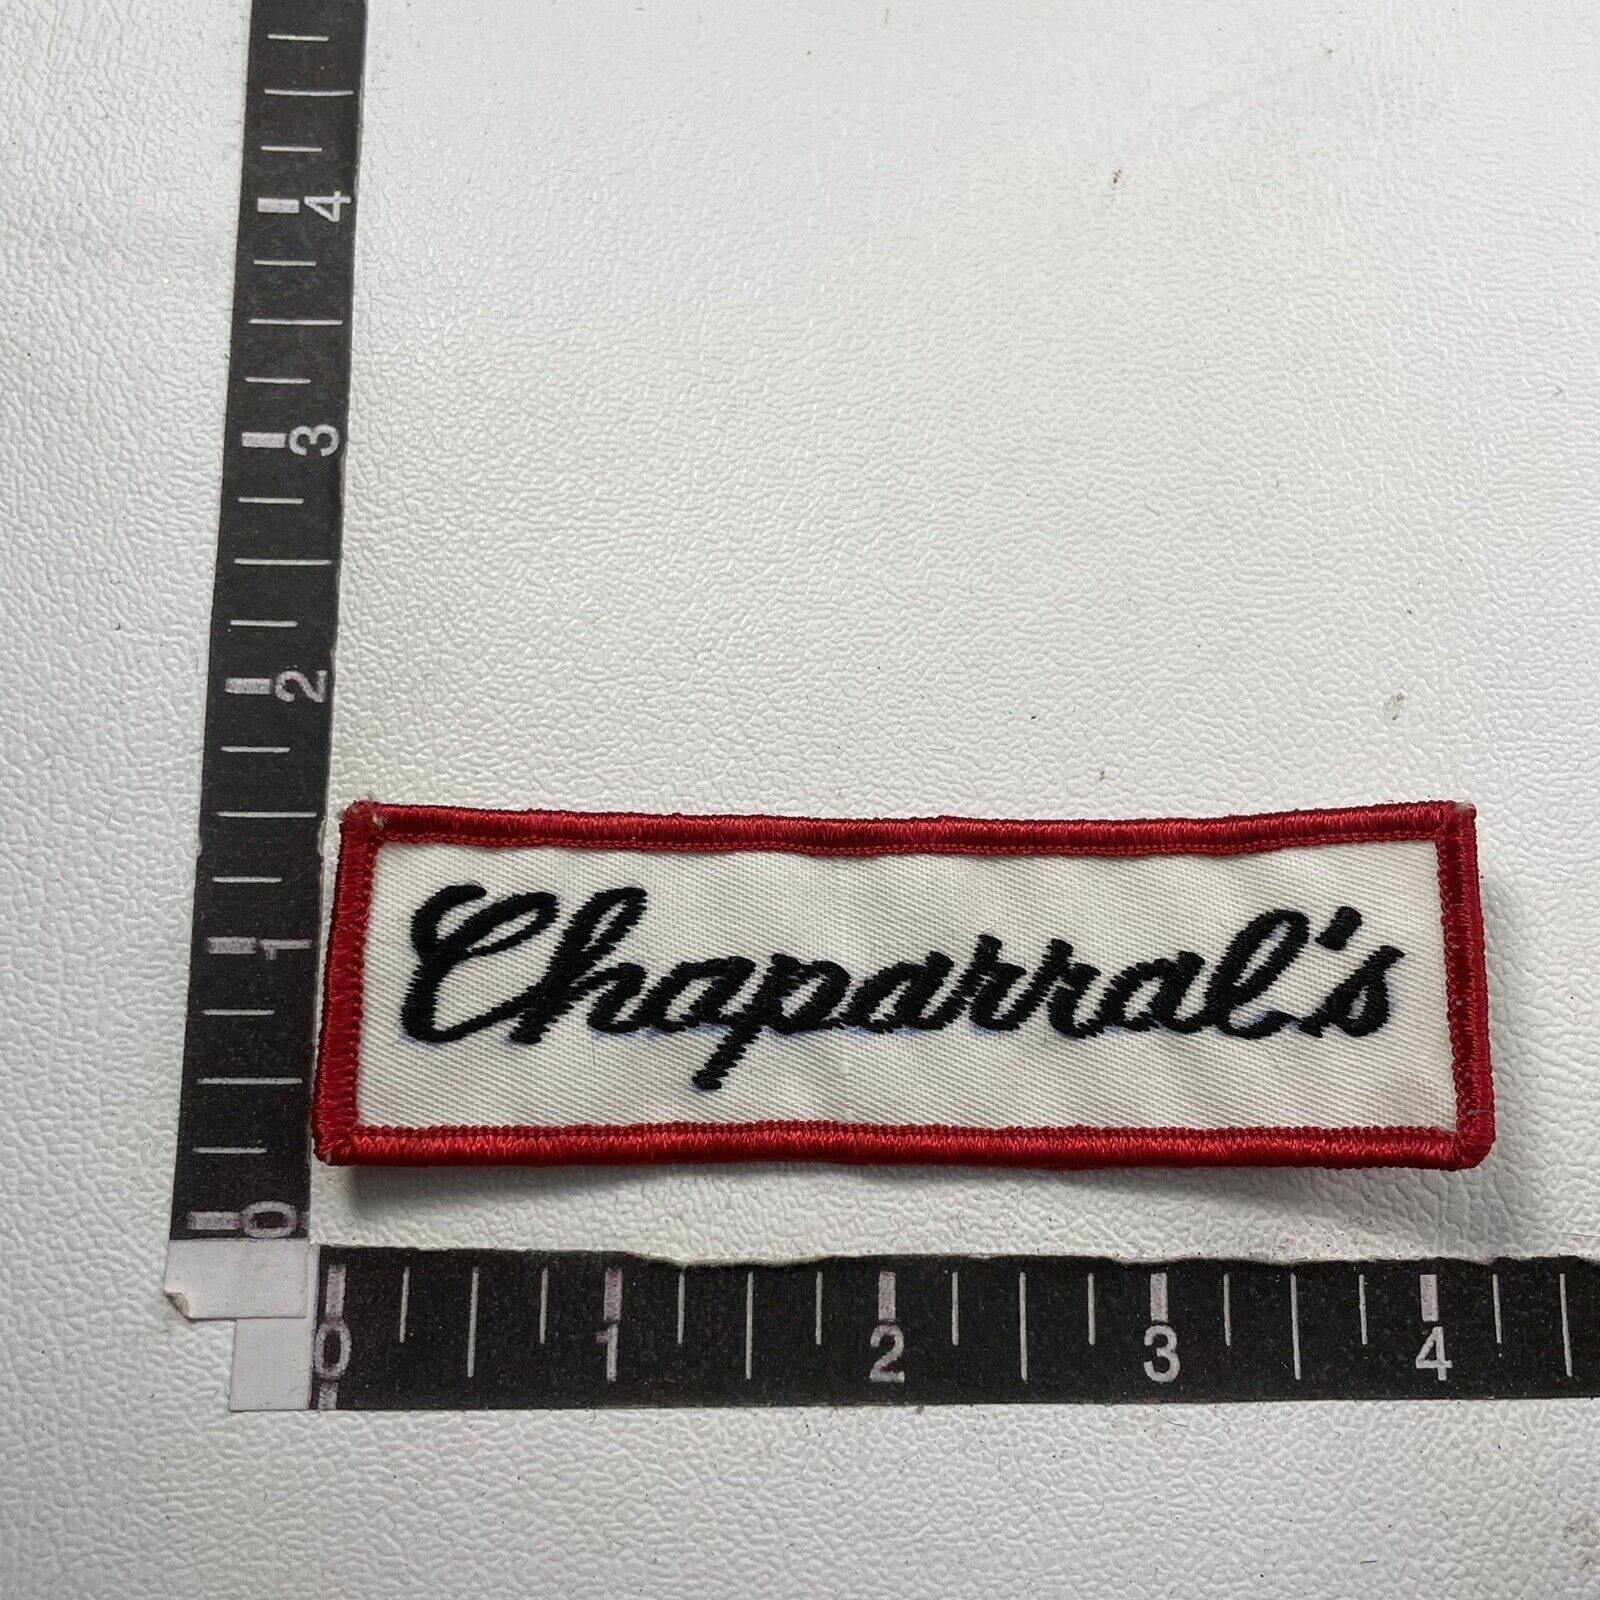 Vtg CHAPARRAL’S Patch (Race Car Auto Related I Think) 01AJ